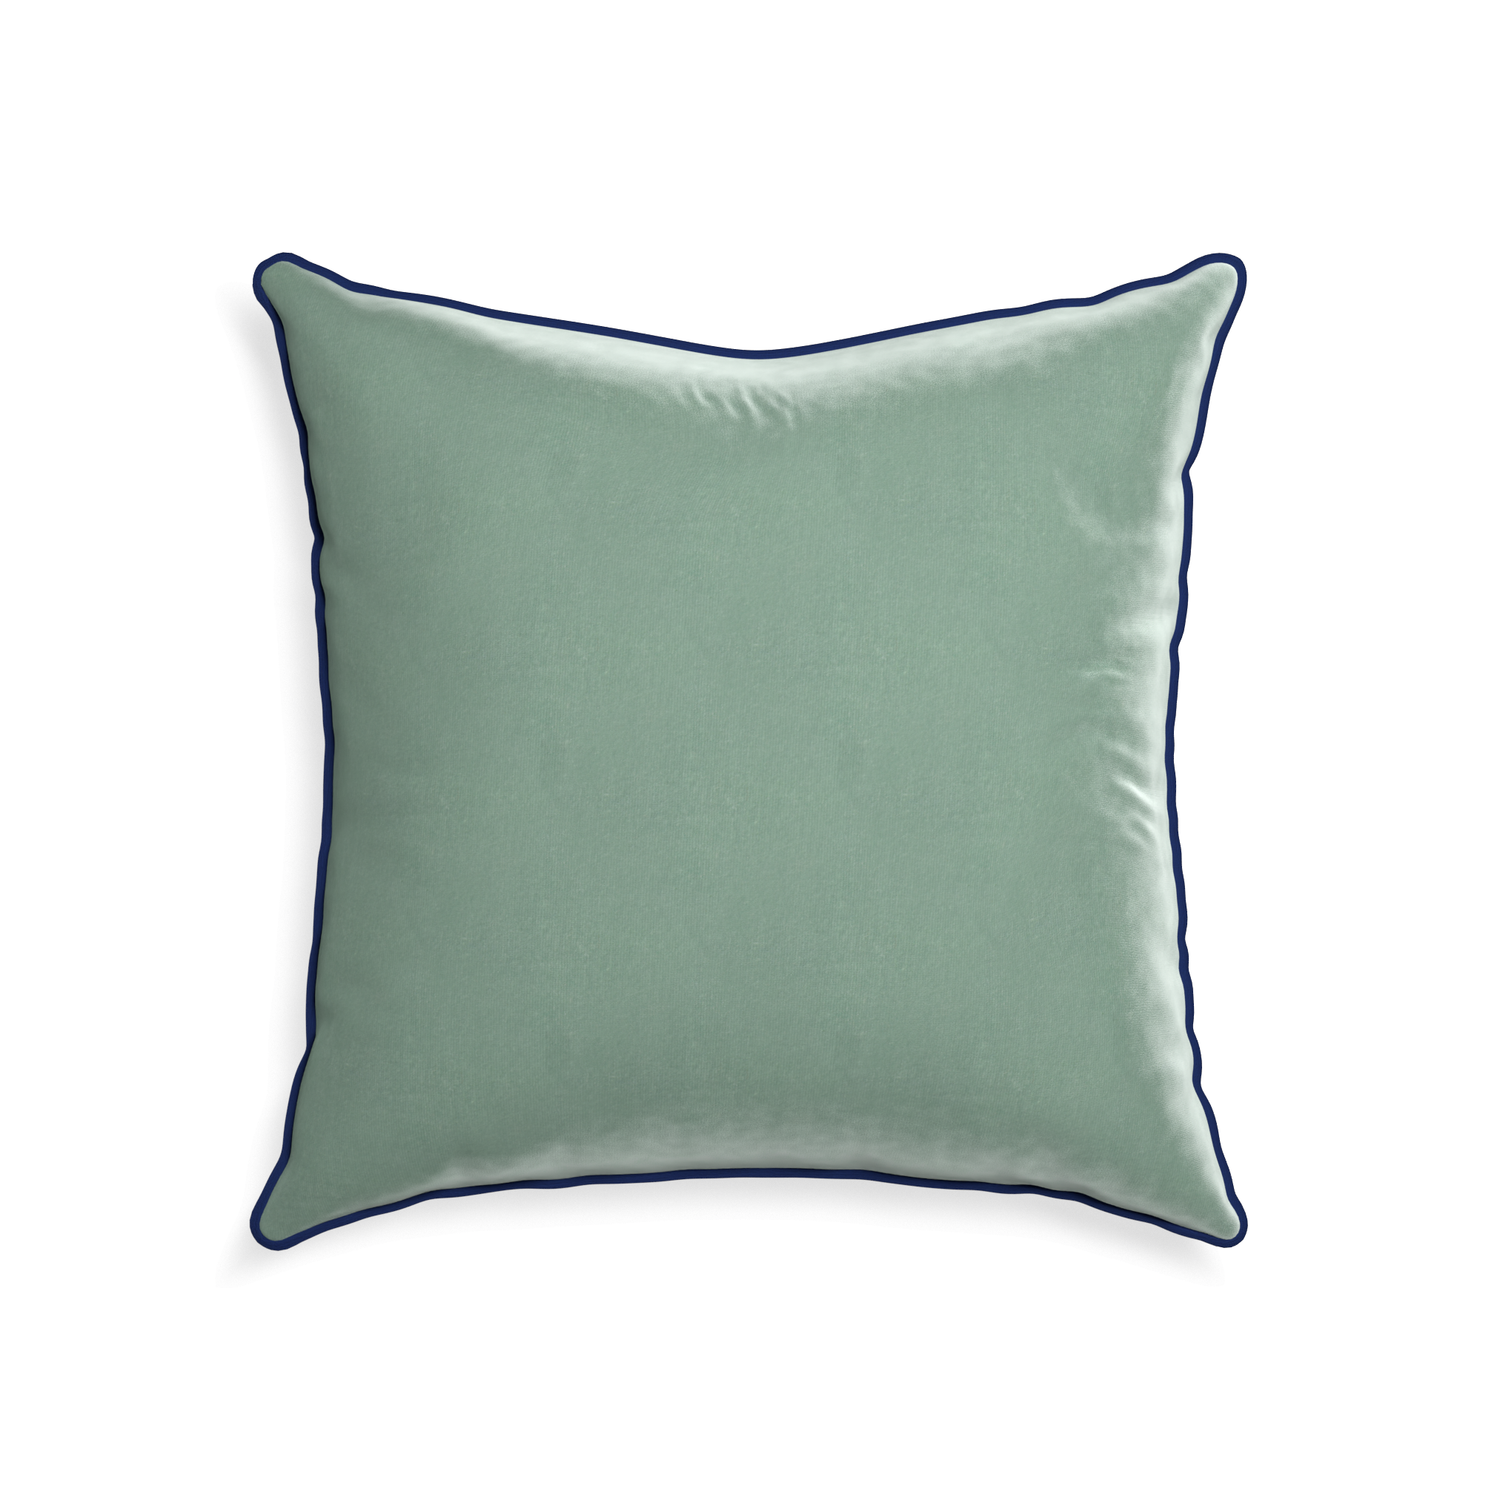 22-square sea salt velvet custom blue greenpillow with midnight piping on white background